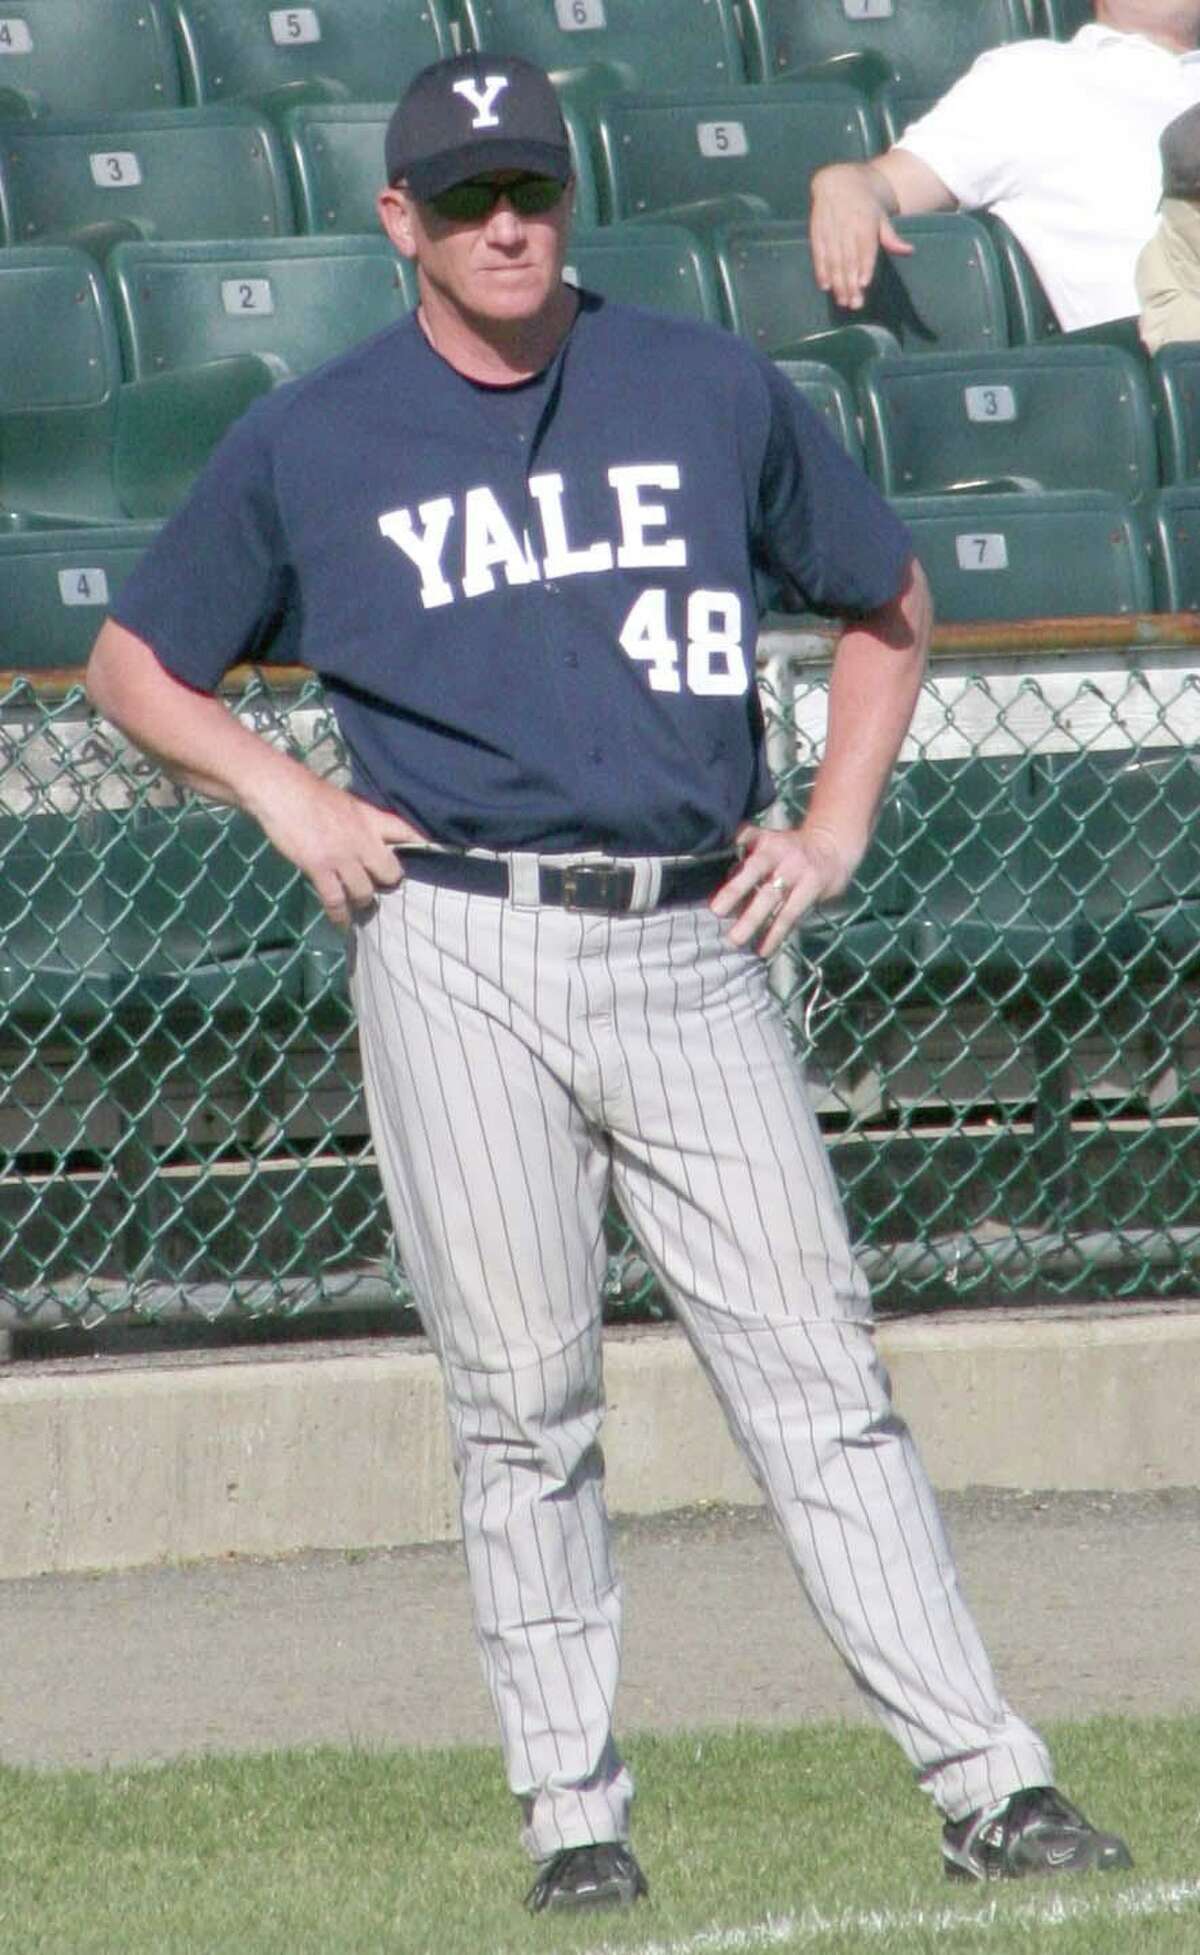 John Stuper, 65, is retiring after 30 years as Yale baseball coach. He is the Bulldogs' all-time winningest coach with a career record of 551-626-4. Yale hosts Harvard for the final three games of the season this weekend. Stuper will be honored in between games of Saturday's doubleheader. Also Saturday, Yale will dedicate George H.W. Bush '48 Field and the Jim Neil '76 Clubhouse. Sunday is Senior Day and the season finale.